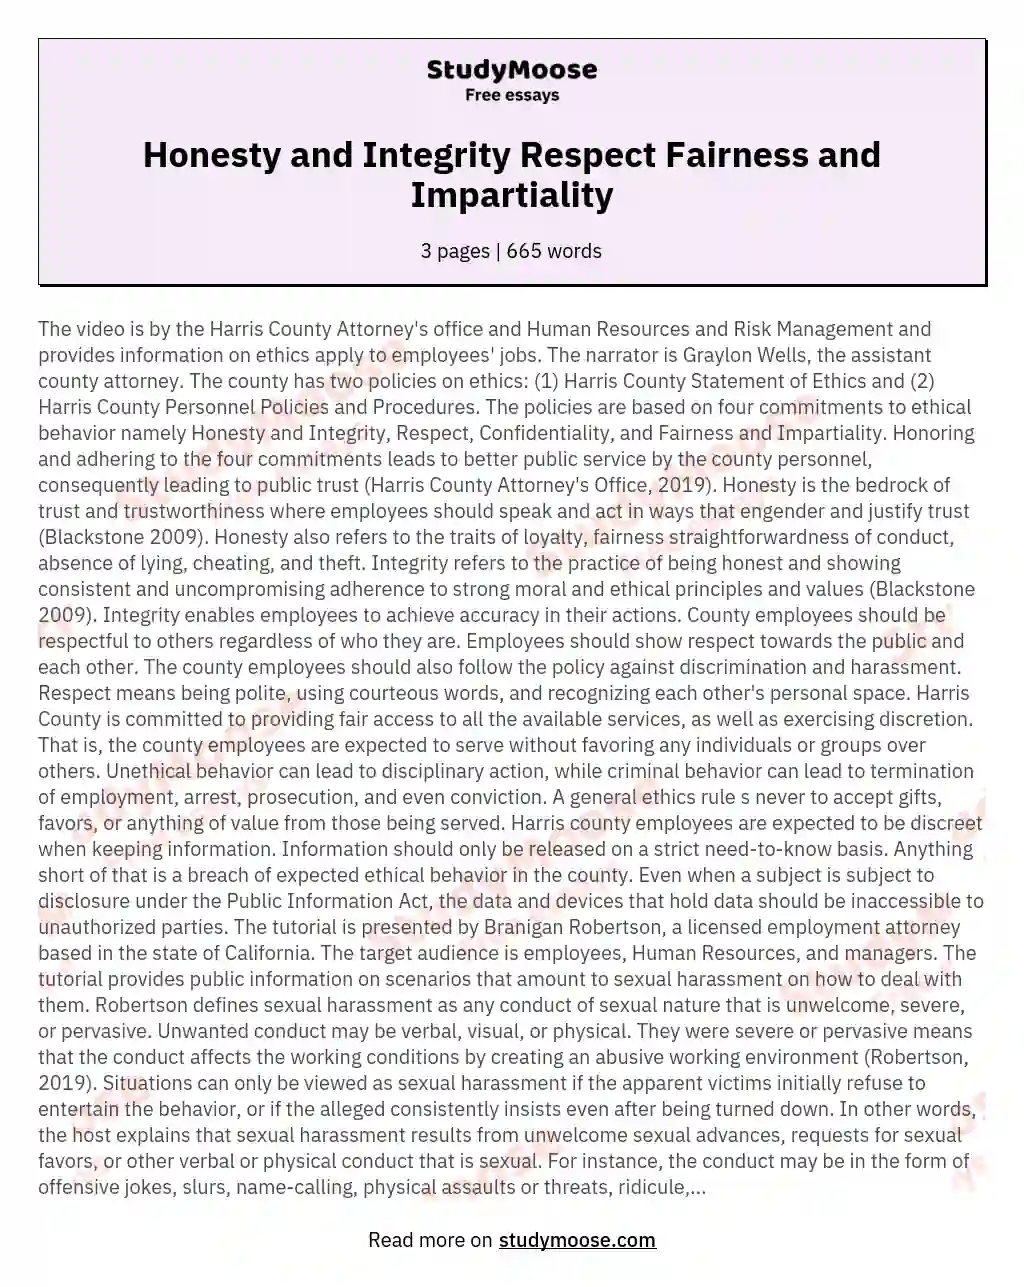 Honesty and Integrity Respect Fairness and Impartiality essay